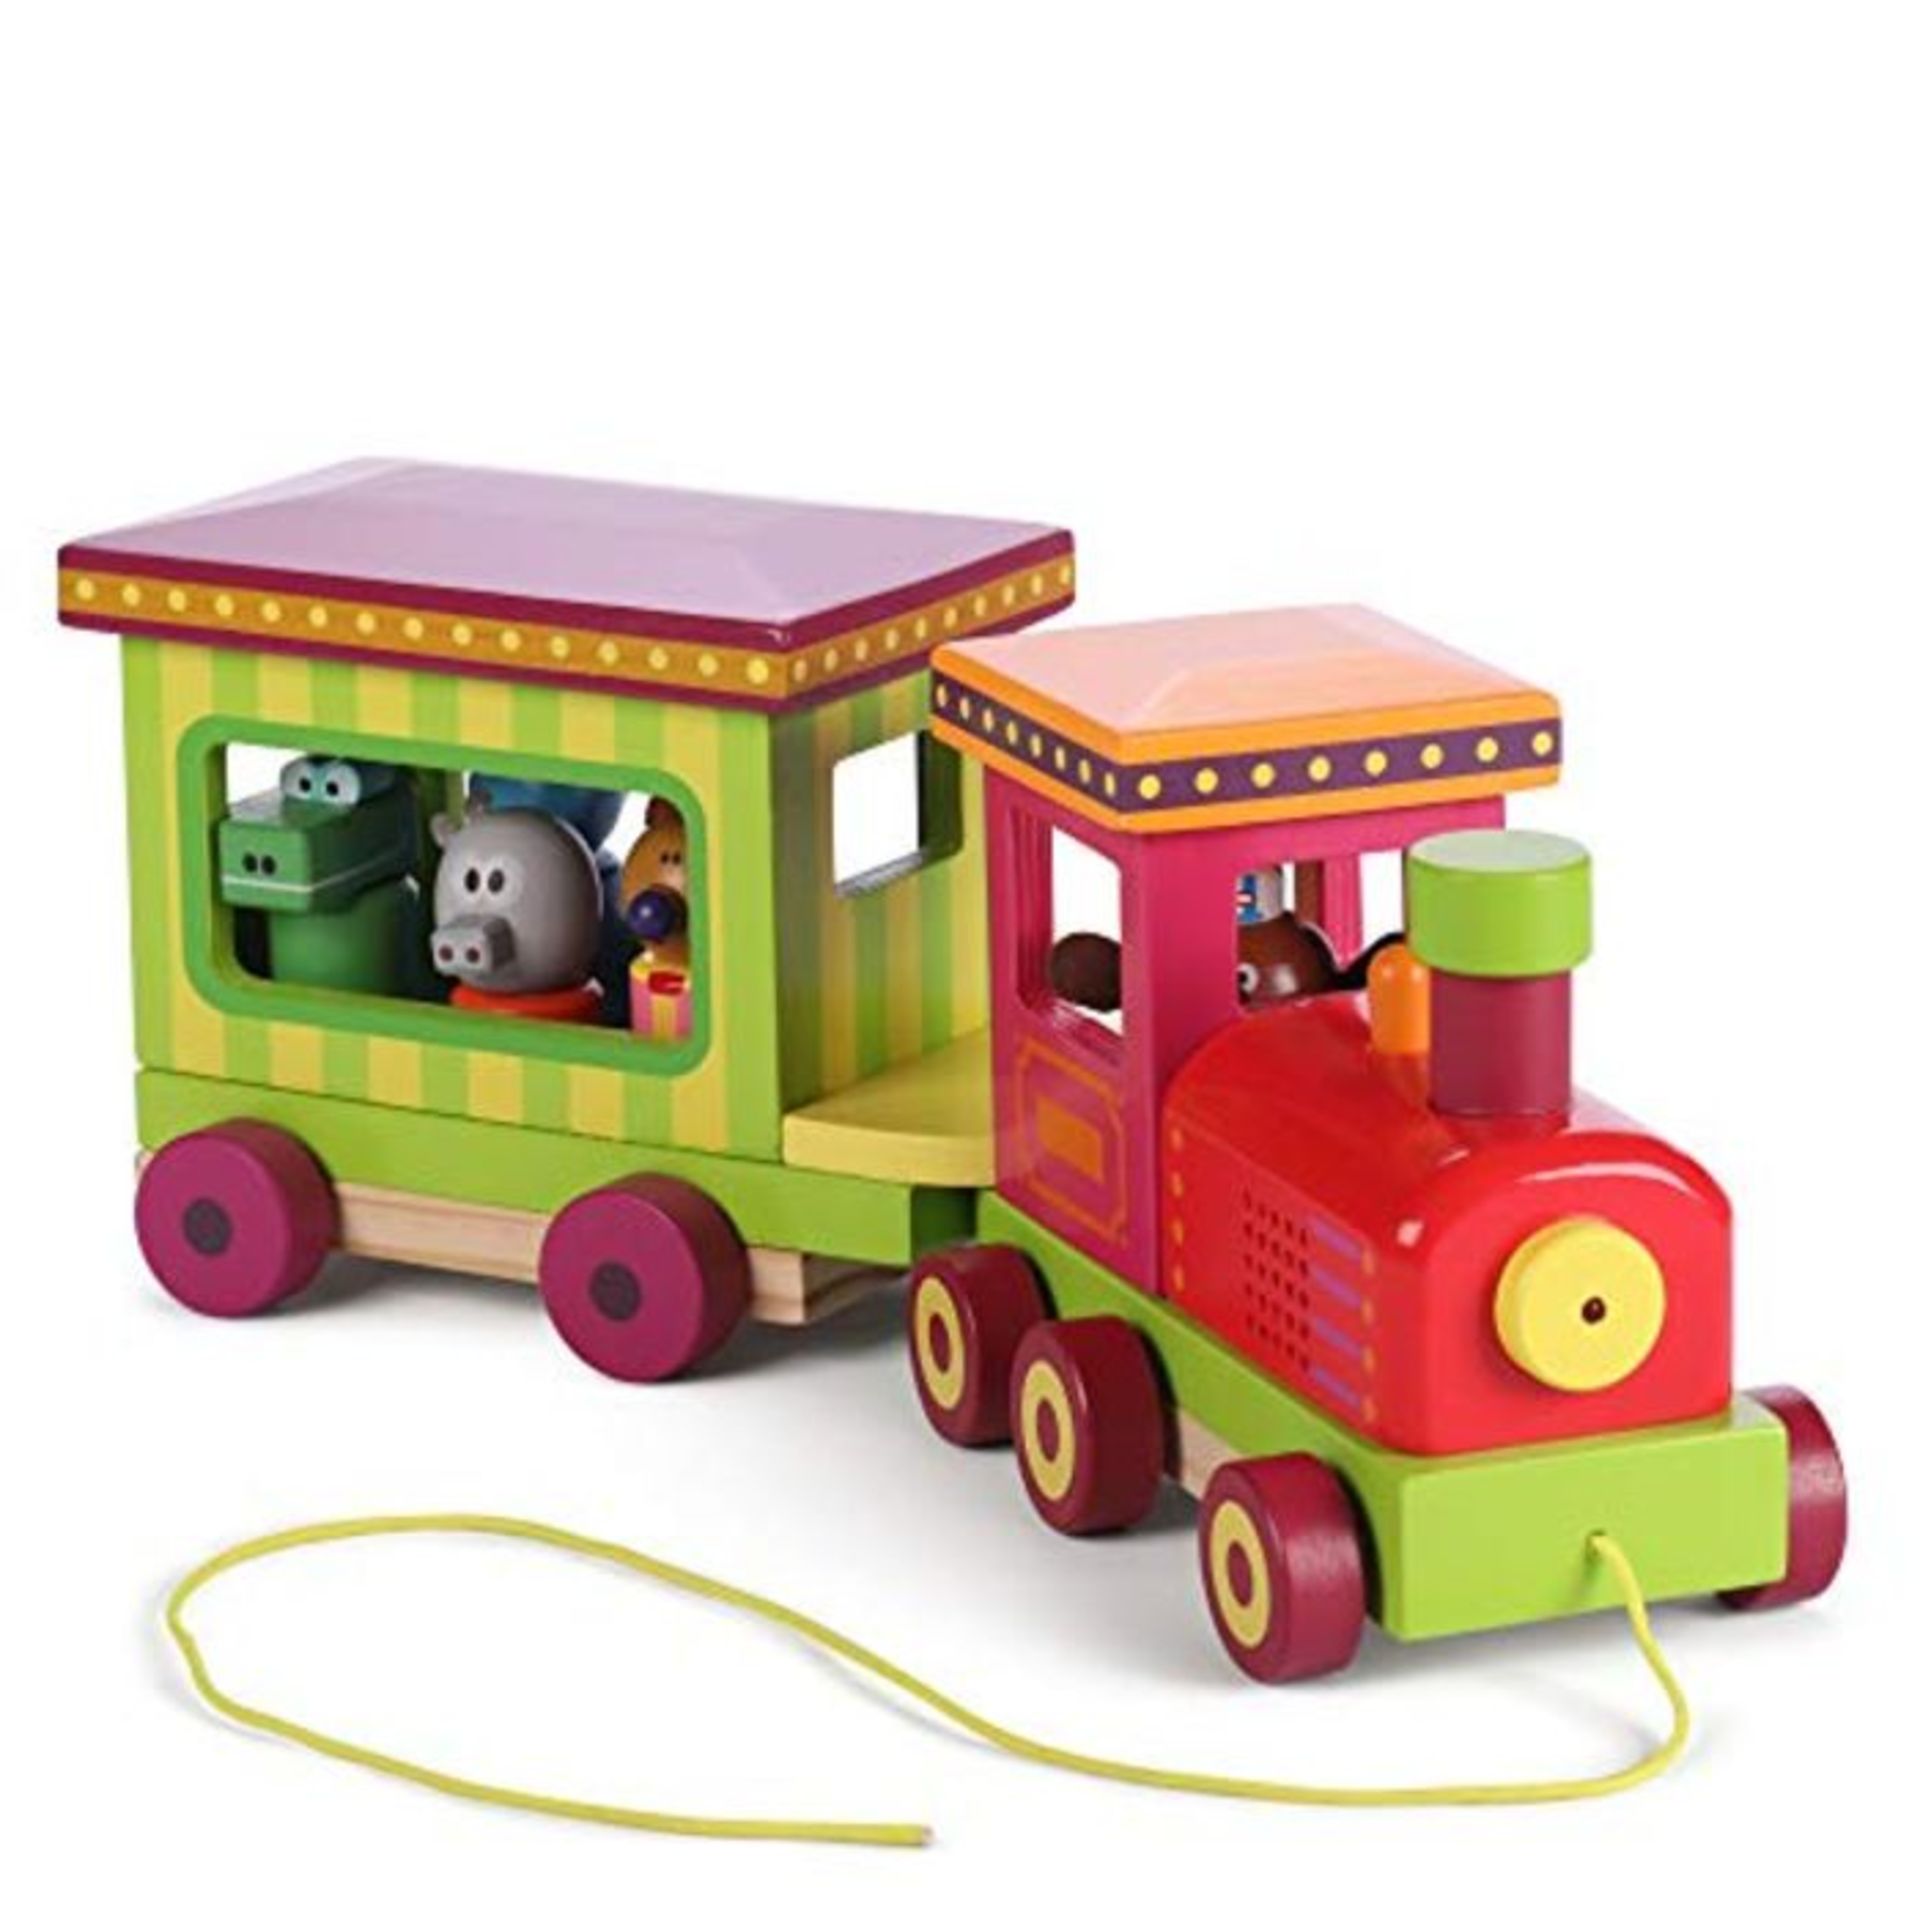 Hey Duggee 9090 Light and Sound Train, Multi Wooden